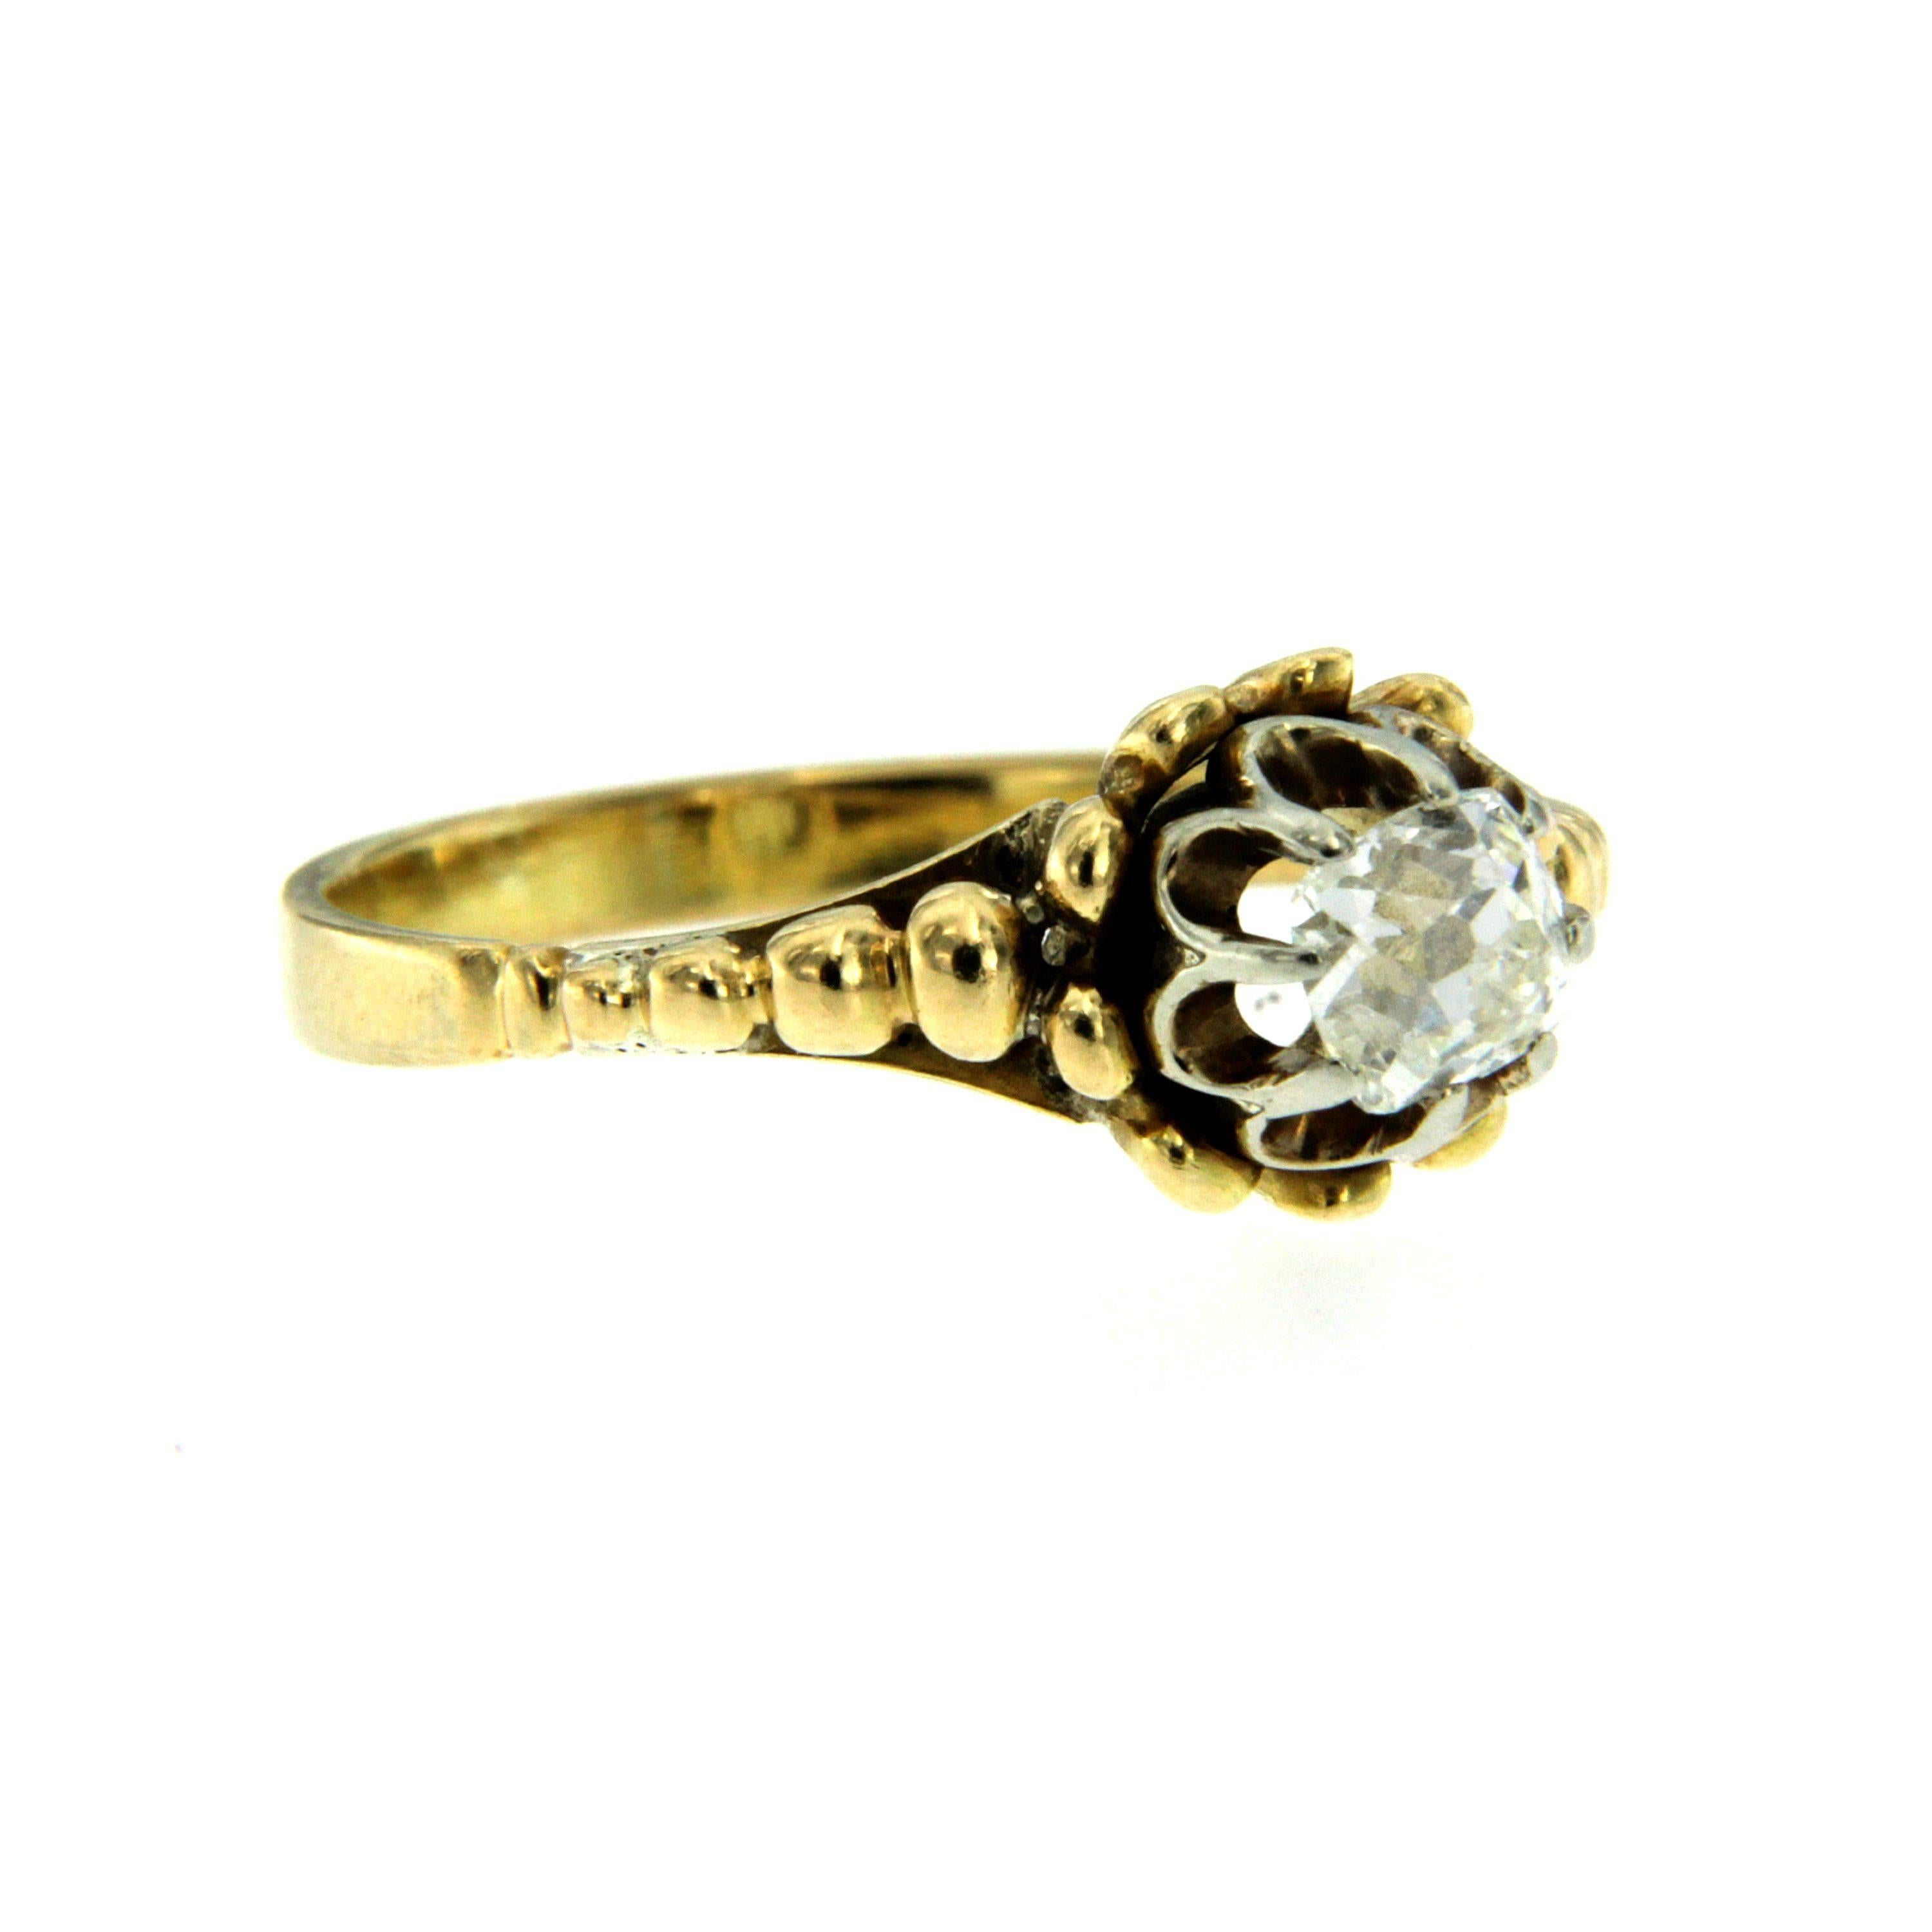 A gorgeous Victorian solitaire ring modelled in 18k Gold and set with a 0.50ct cushion cut diamond H color VVs. Eight very fine claws hold the stone in an open gallery. Perfect for everyday use

CONDITION: Pre-Owned - Excellent 
METAL: 18k yellow